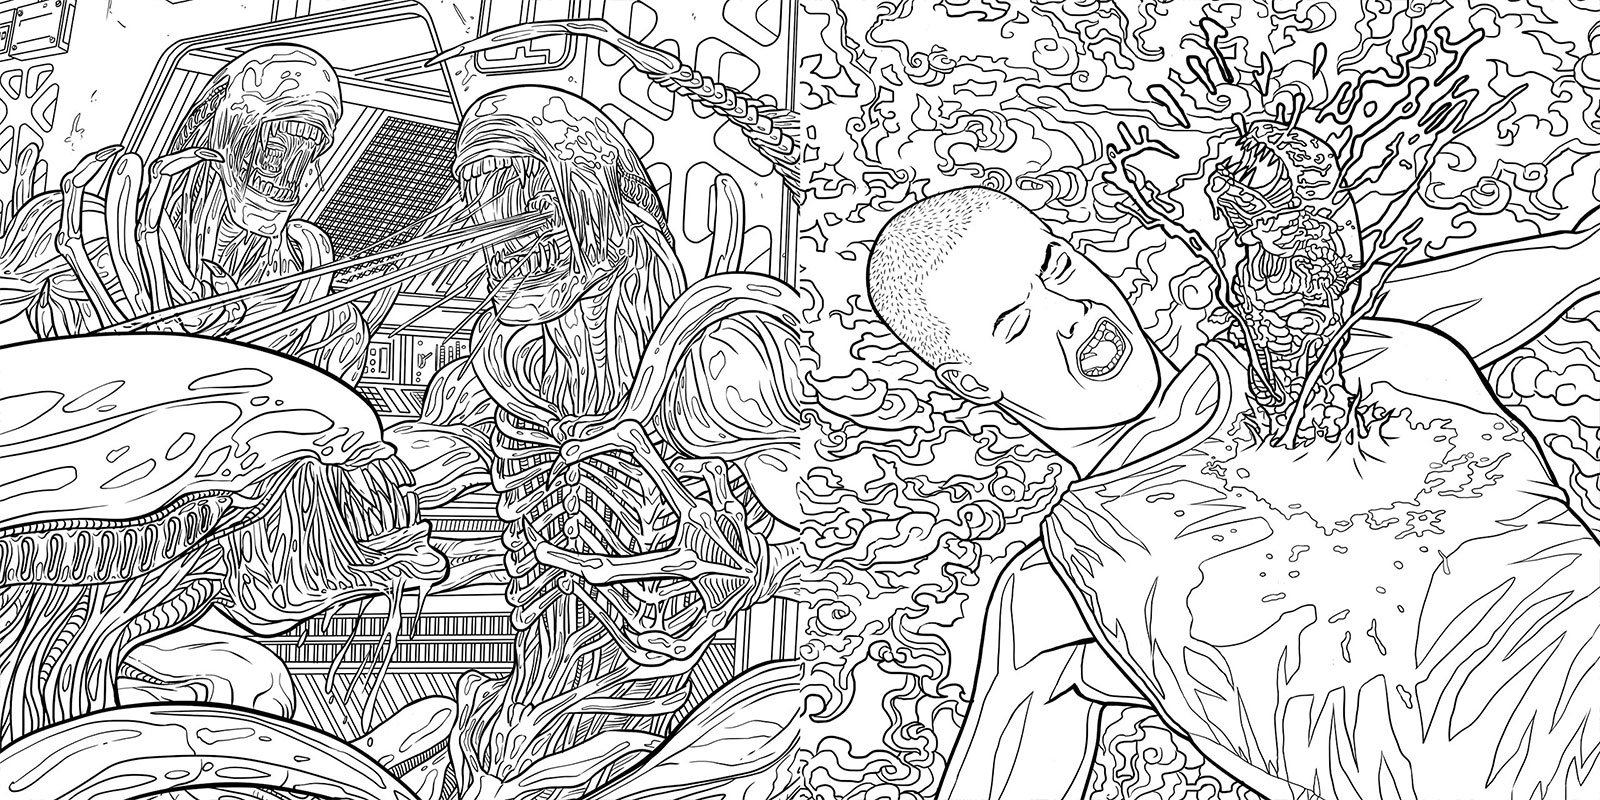 Color in Some Xenomorphs in "Alien: The Coloring Book"